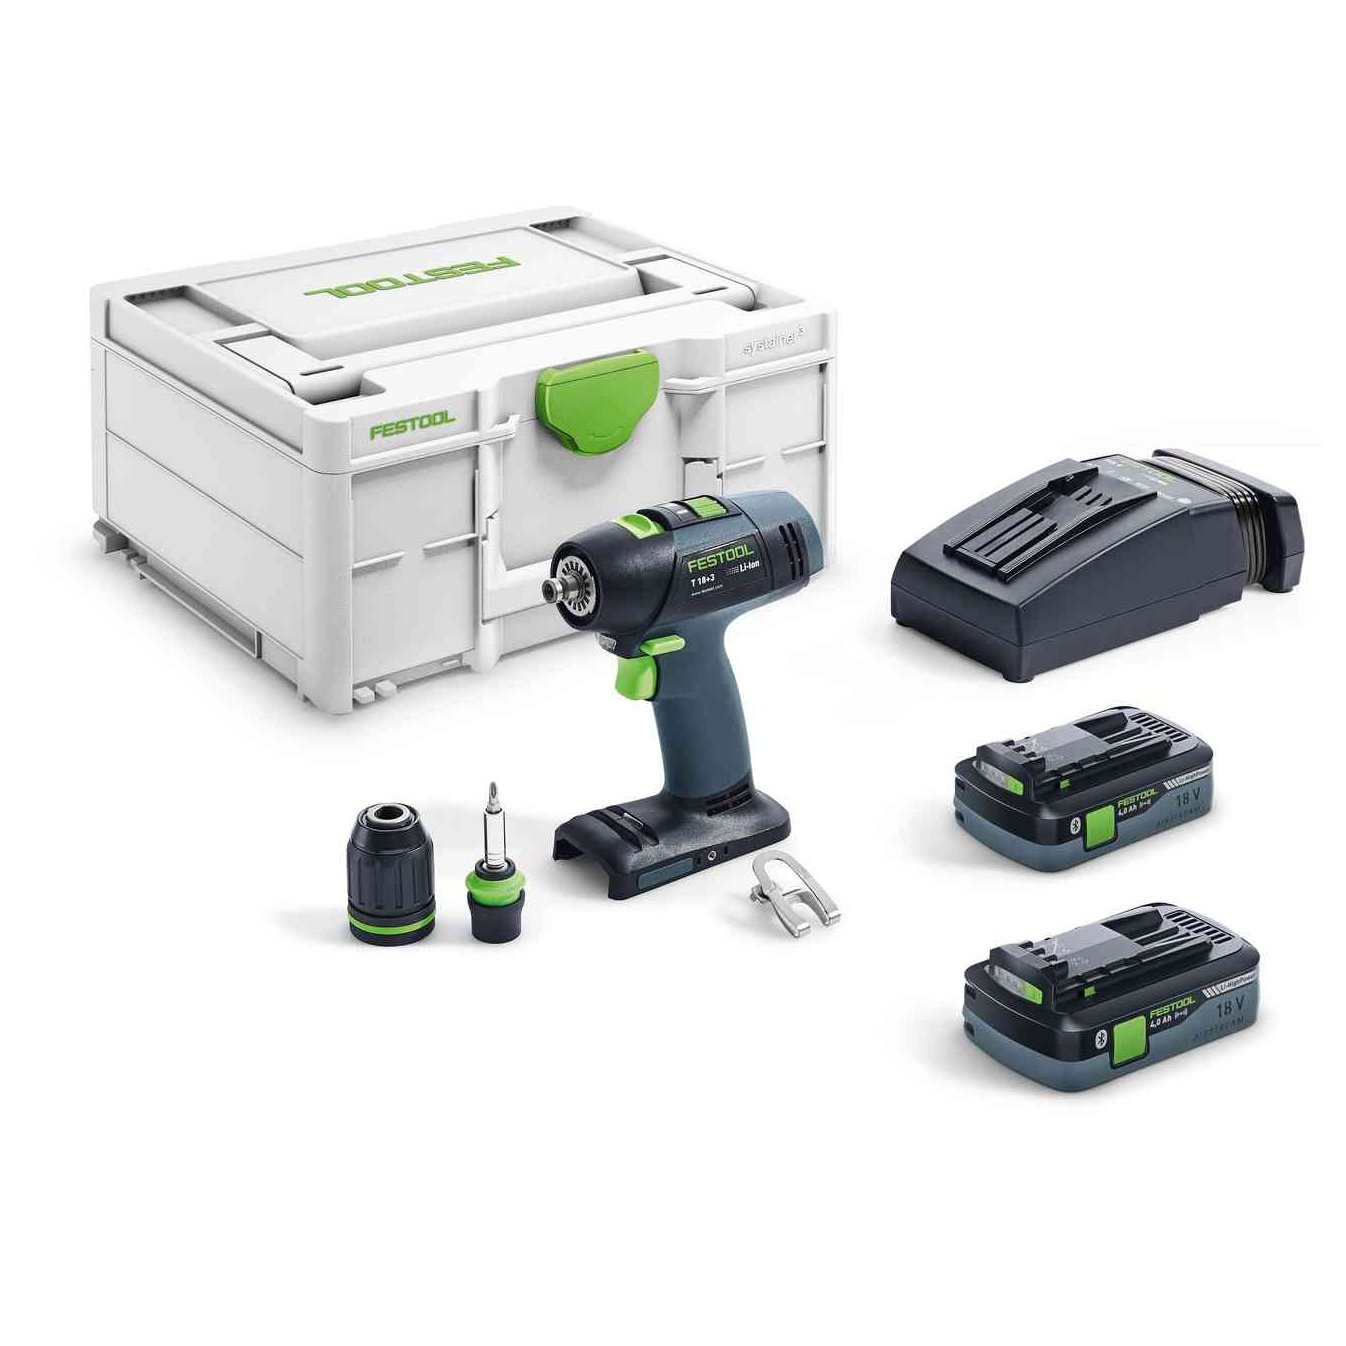 Festool T 18+3 Li-Basic Drill Kit With Batteries & Charger 576448 tool-junction-nz